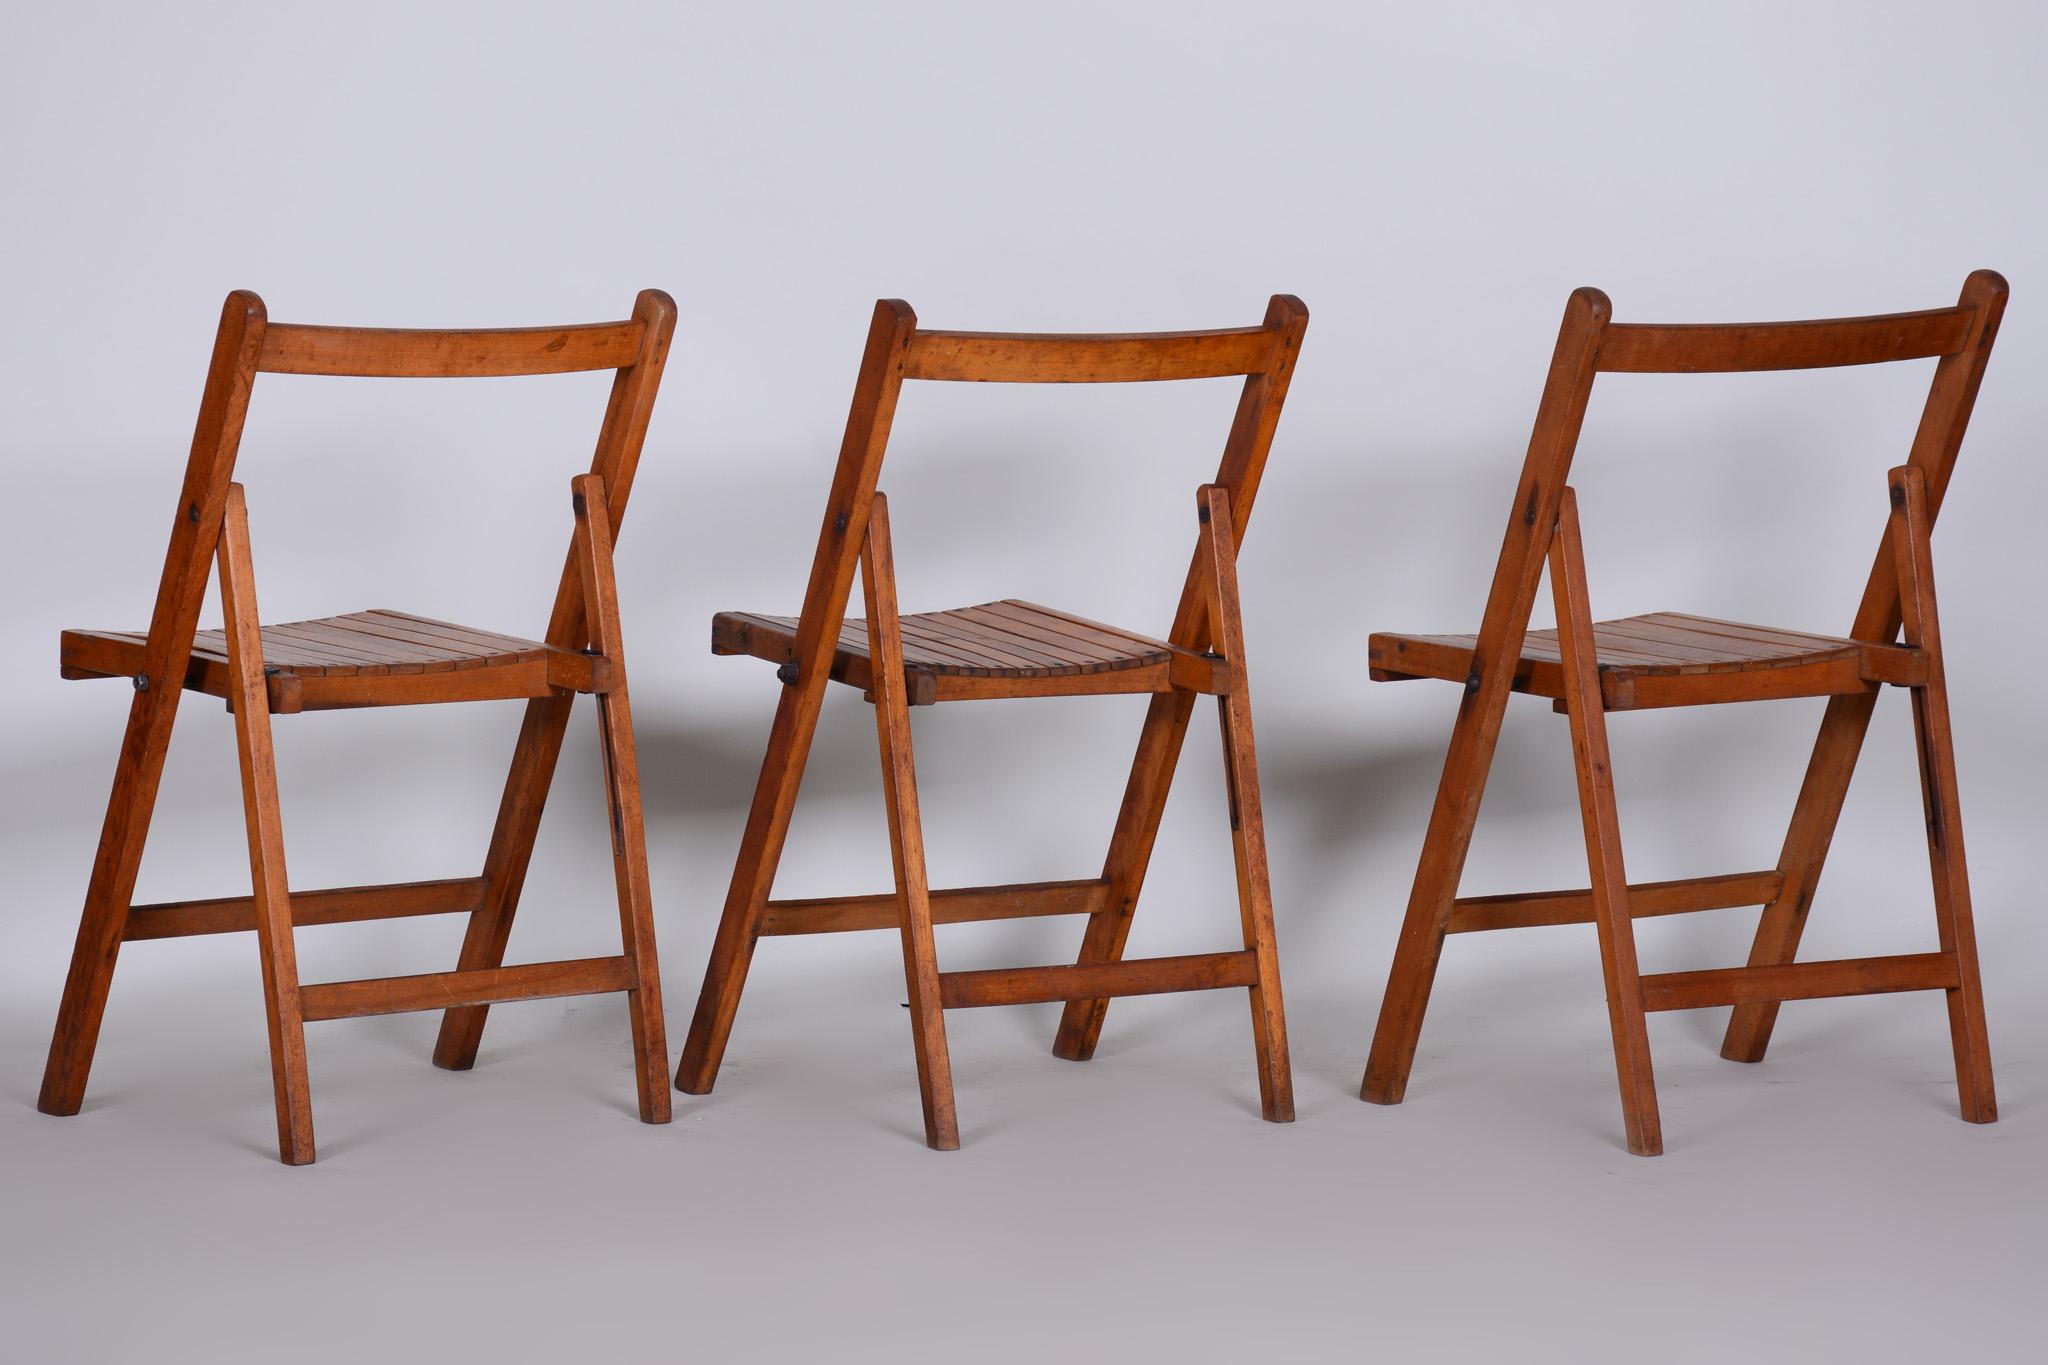 Beech Midcentury Chairs, 3 Pieces, 1950s, Well Preserved Condition For Sale 8